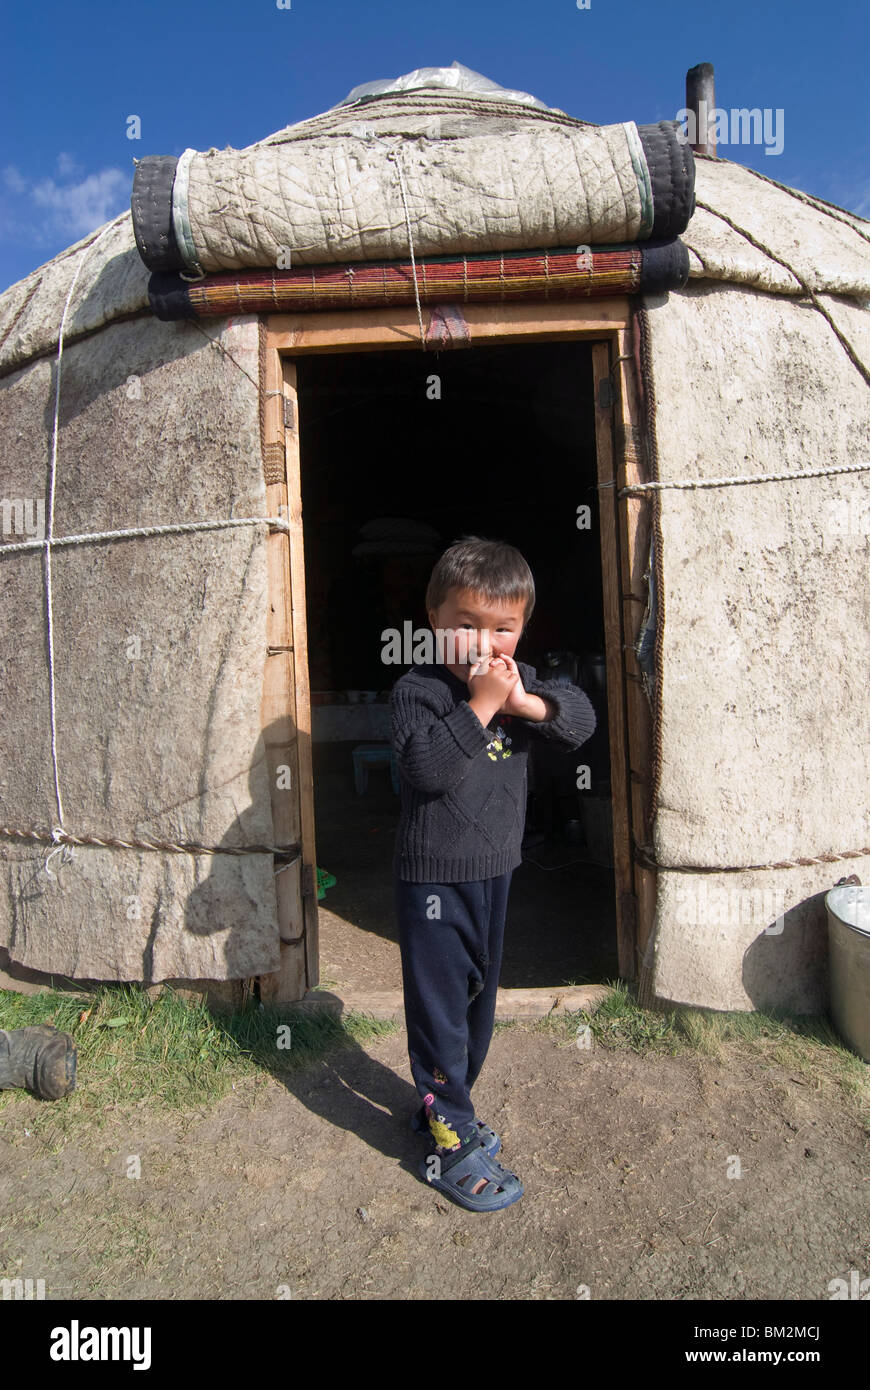 Child in yurt, tent of Nomads at Song Kol, Kyrgyzstan Stock Photo